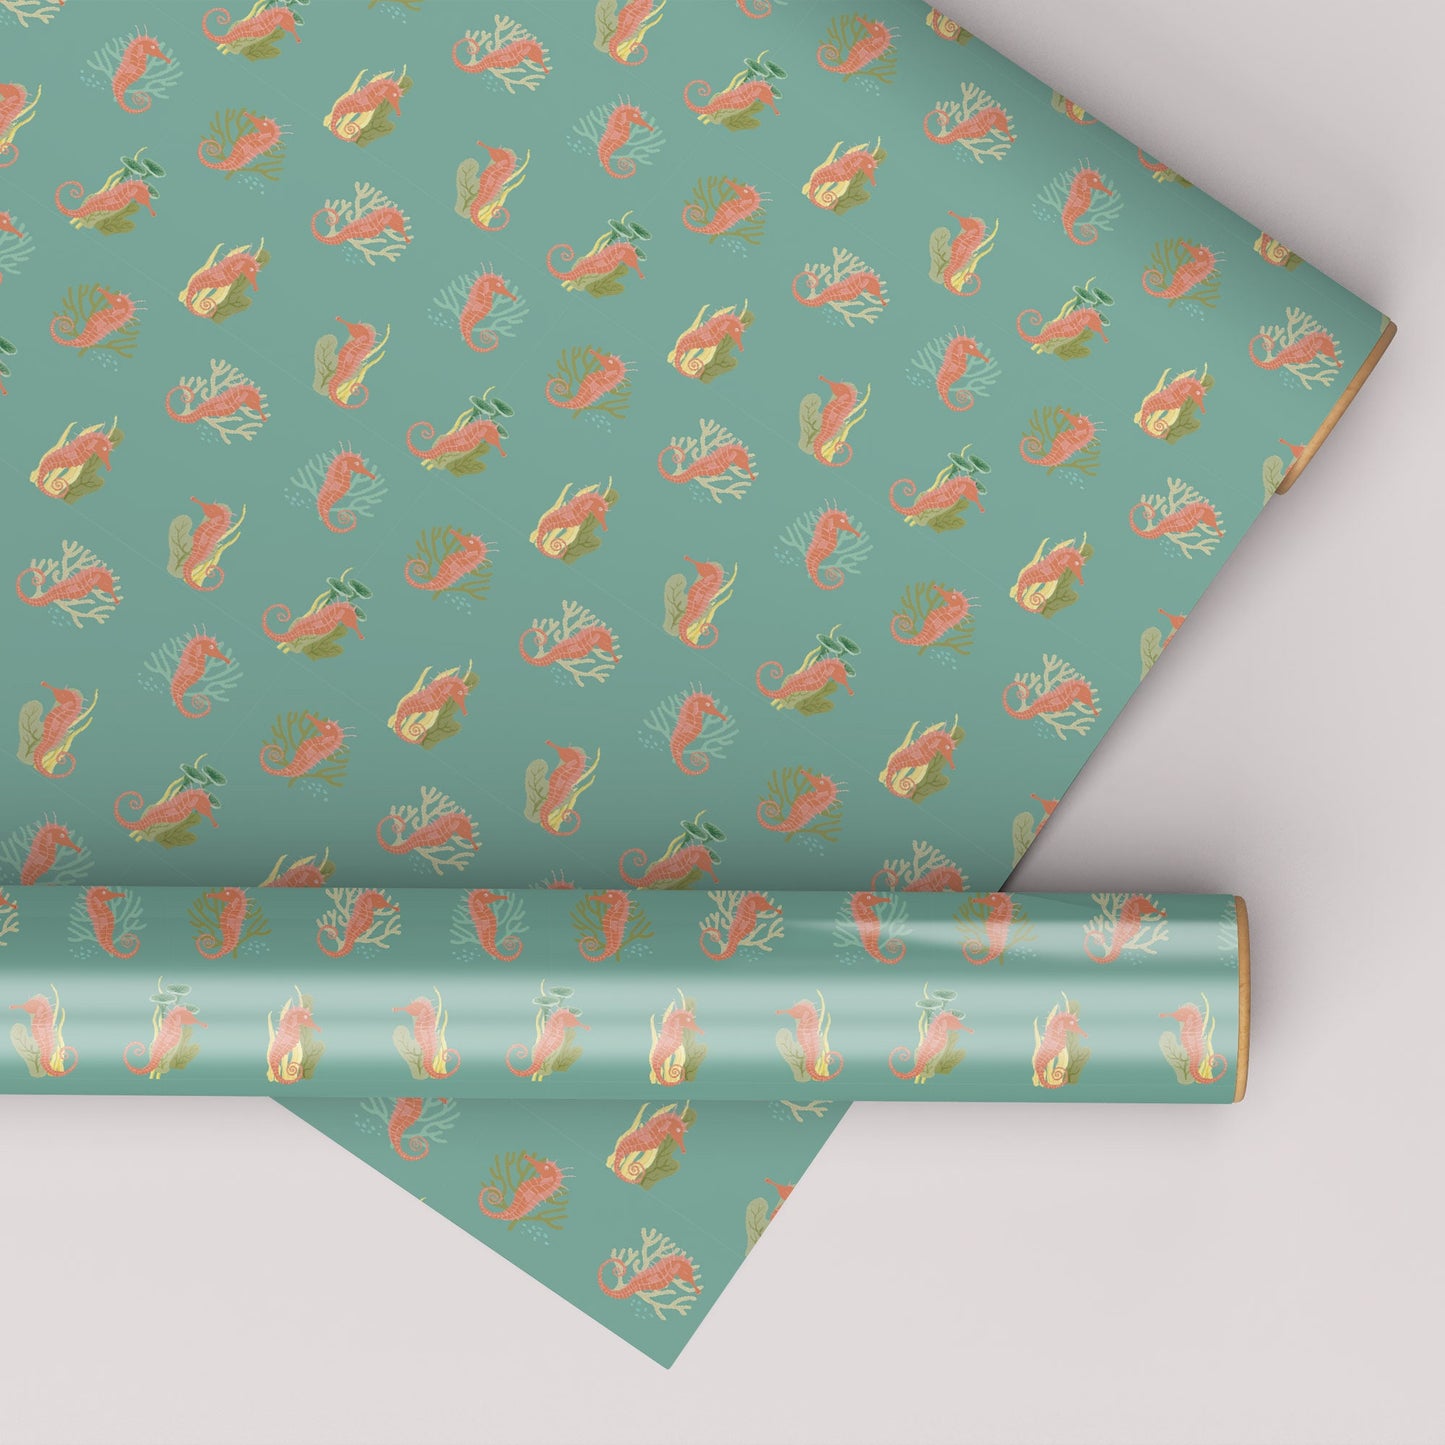 Wrapping paper 'Seahorse' 48x69cm turquoise